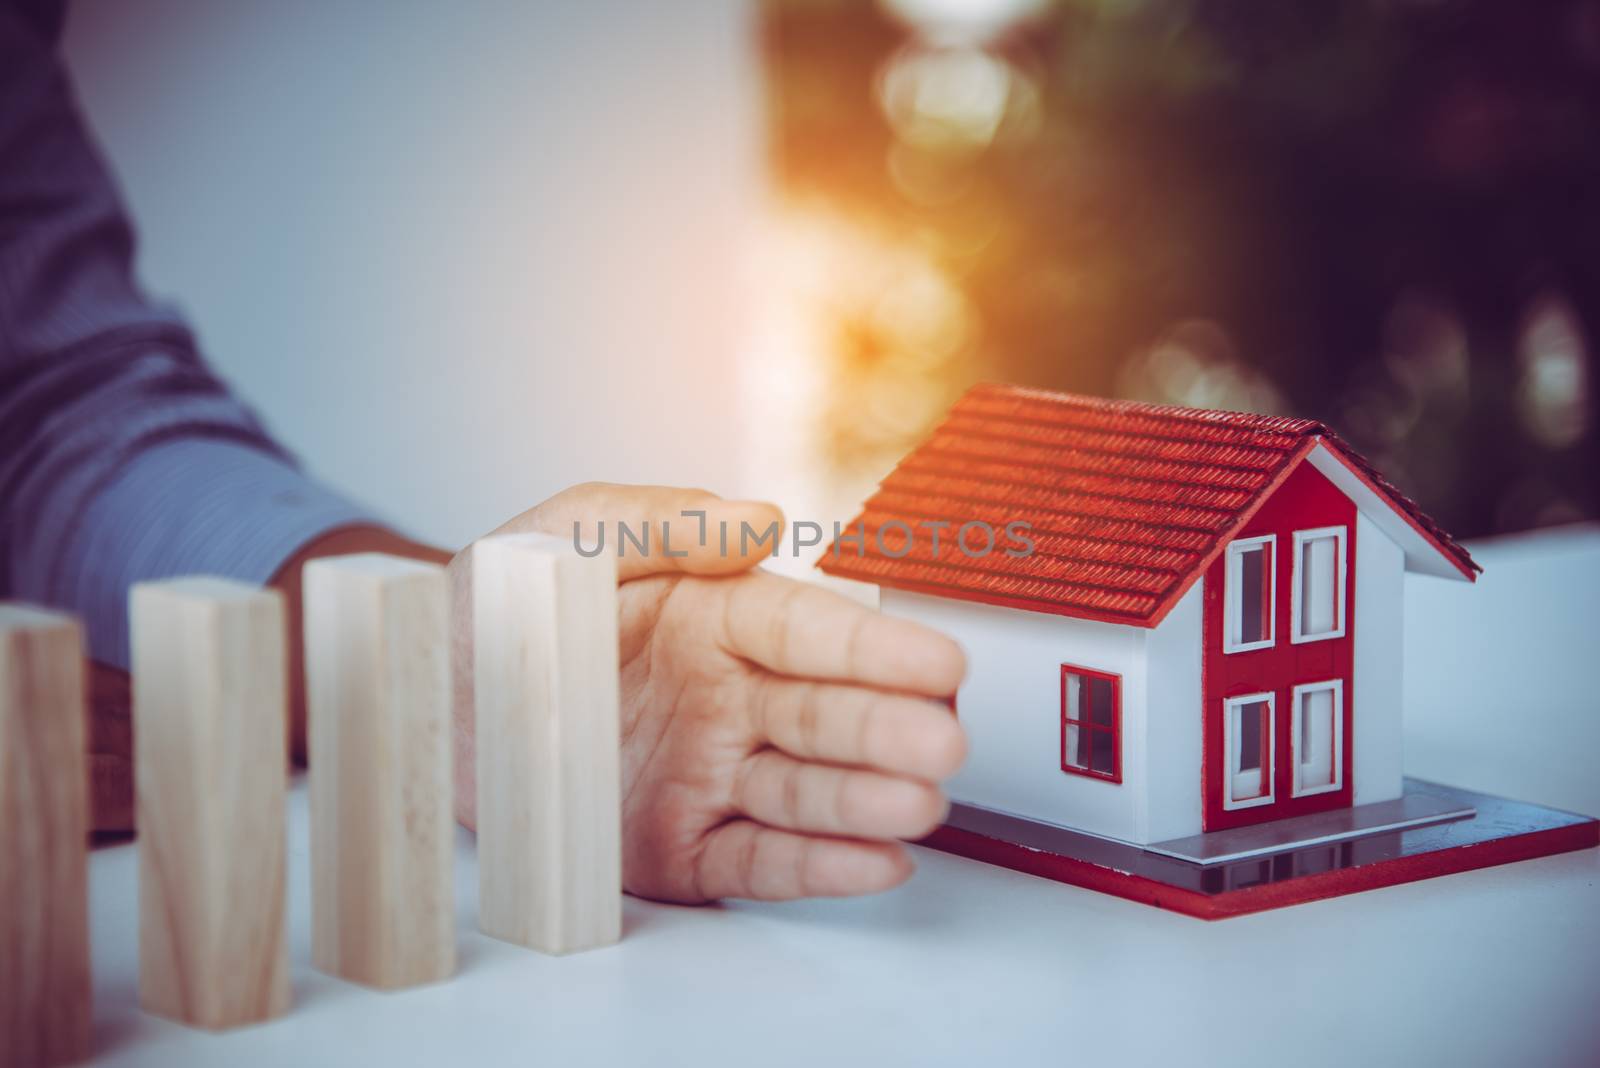  hand stopping risk the wooden blocks from falling on house, Hom by photobyphotoboy